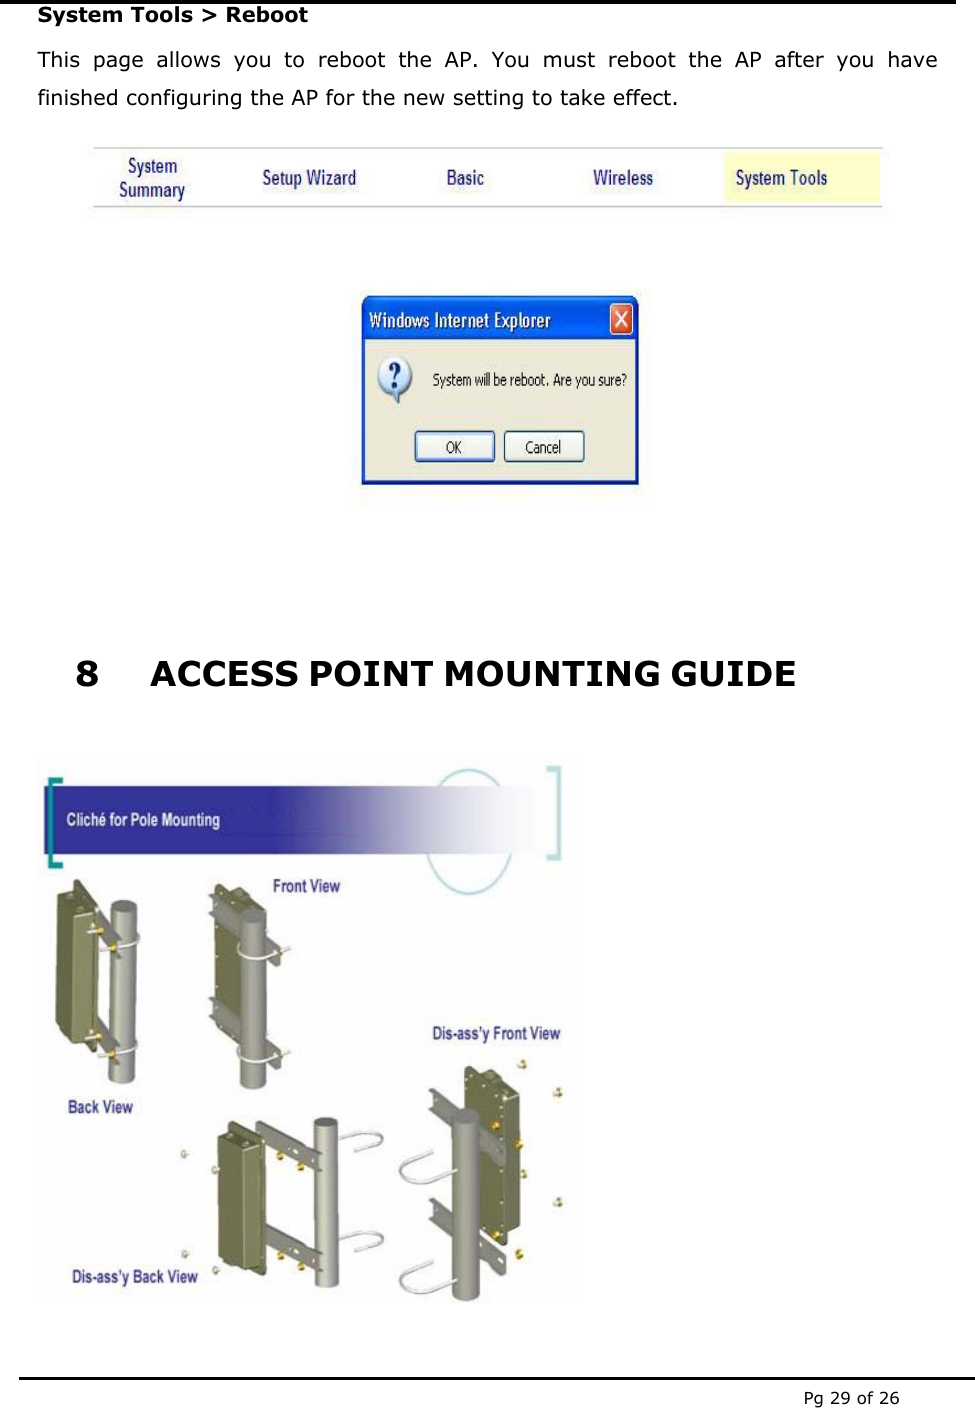  Pg 29 of 26 System Tools &gt; Reboot This page allows you to reboot the AP. You must reboot the AP after you have finished configuring the AP for the new setting to take effect.     8 ACCESS POINT MOUNTING GUIDE    